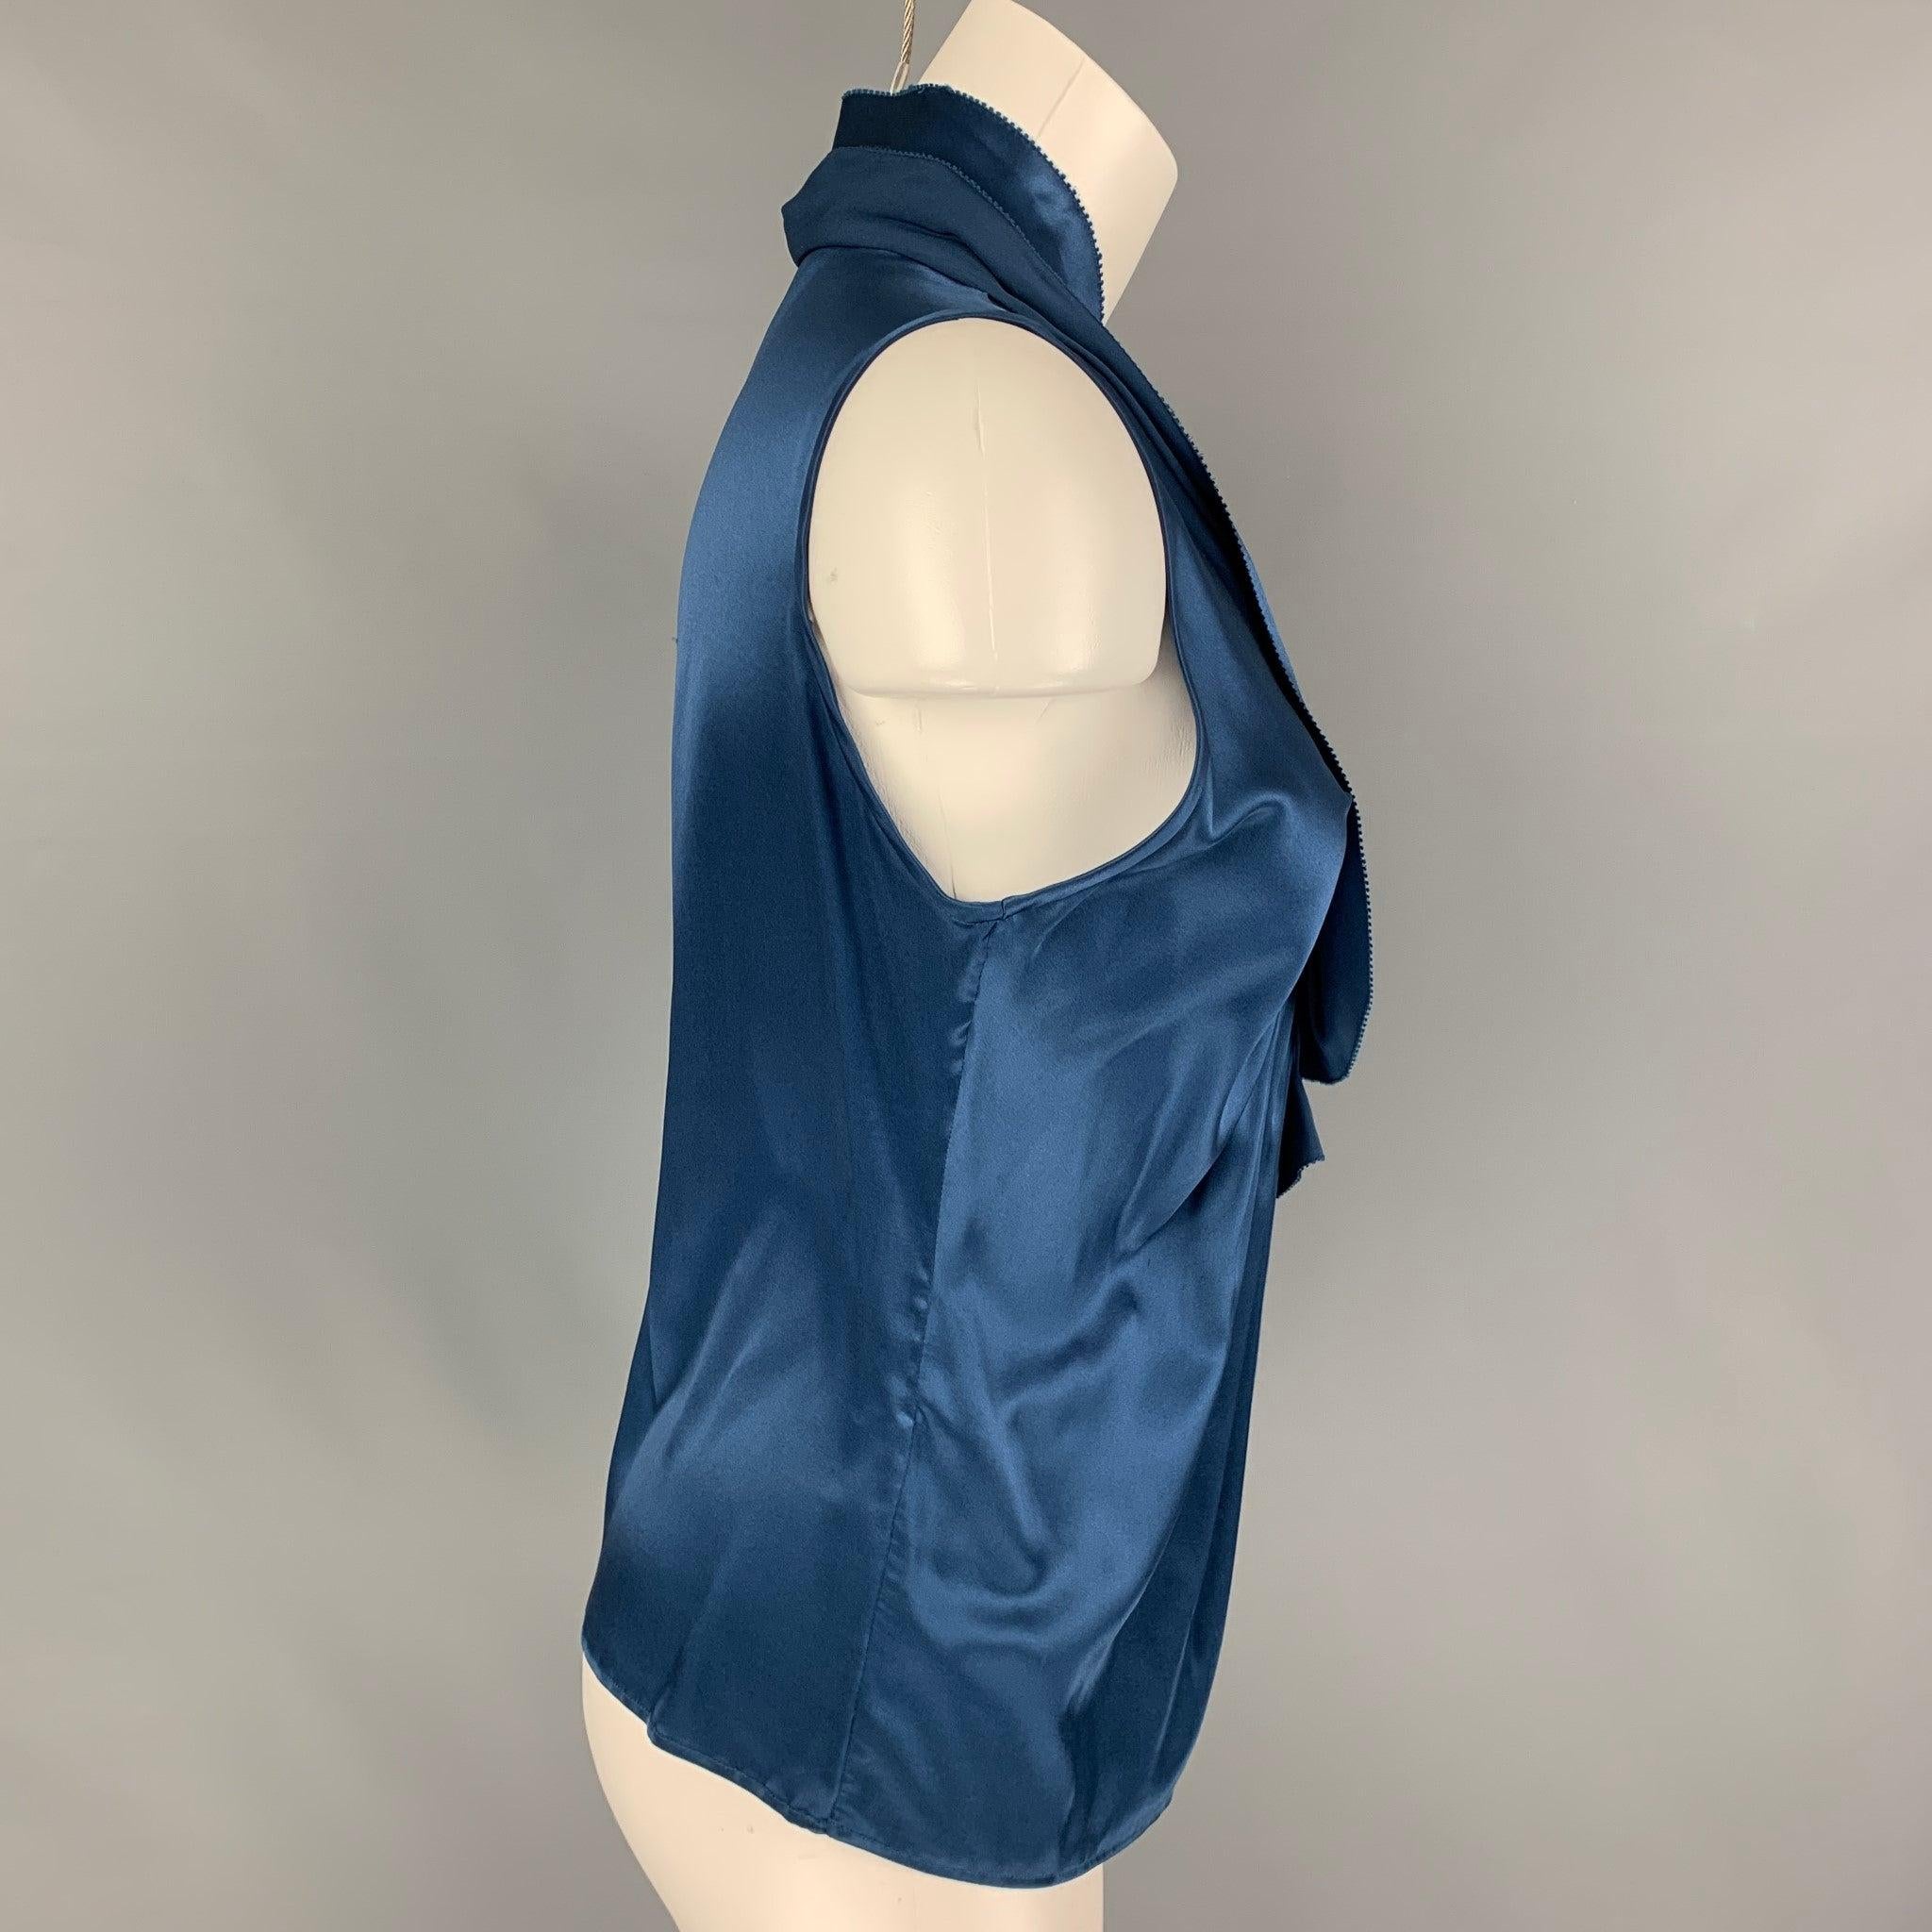 ETRO blouse comes in a blue silk featuring a ruffled design, v-neck, and a sleeveless style. Made in Italy.
Very Good
Pre-Owned Condition. 

Marked:   40 

Measurements: 
 
Shoulder: 12.5 inches  Bust: 28 inches  Length: 21.5 inches 

  
  
